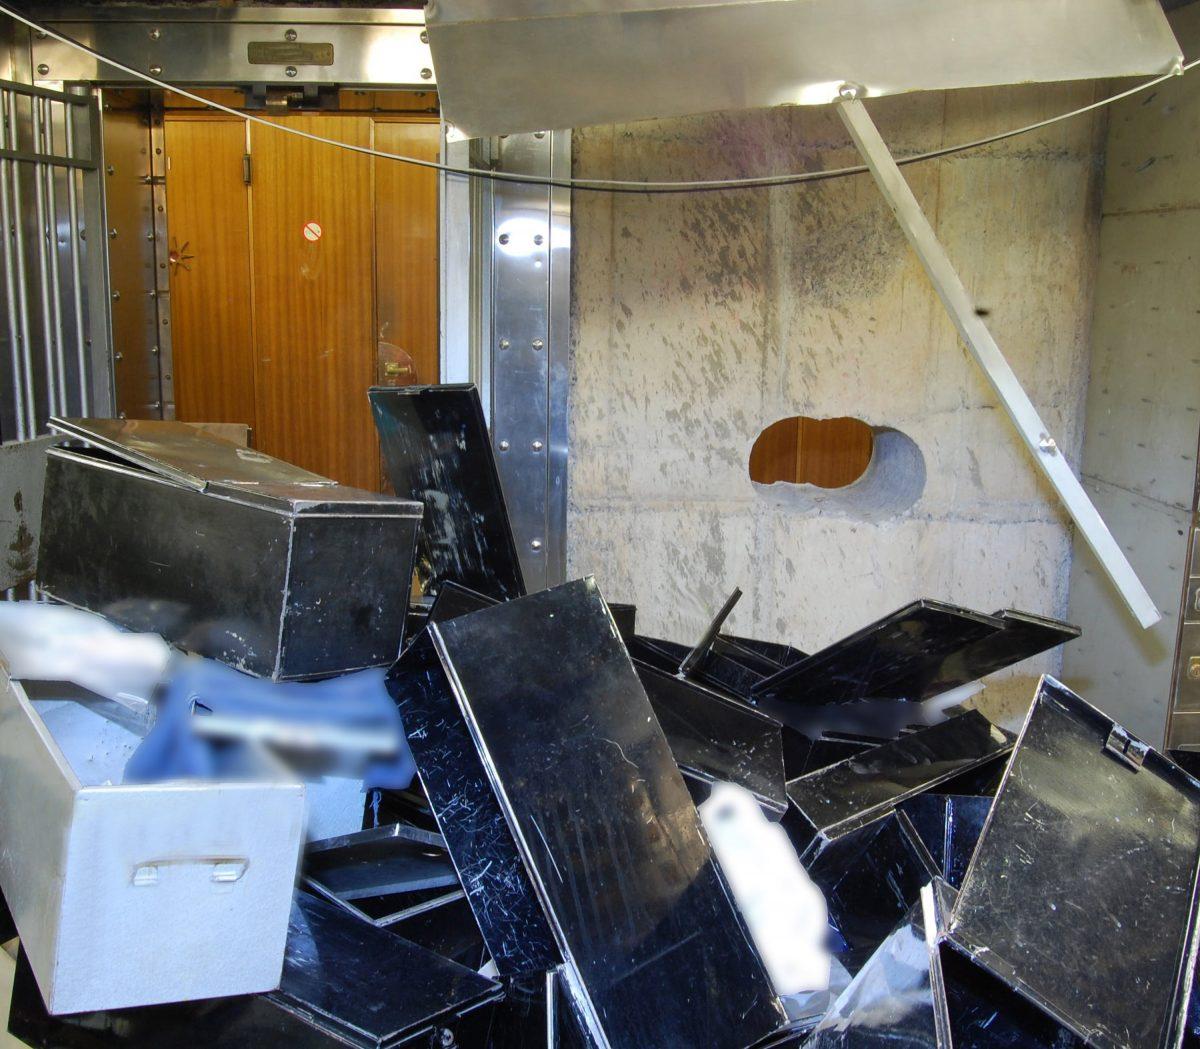 This handout image supplied by the Metropolitan Police shows a view of the vault at Hatton Garden Safe Deposit Limited following the Easter weekend robbery, in London, England in April 2015. (Metropolitan Police via Getty Images)